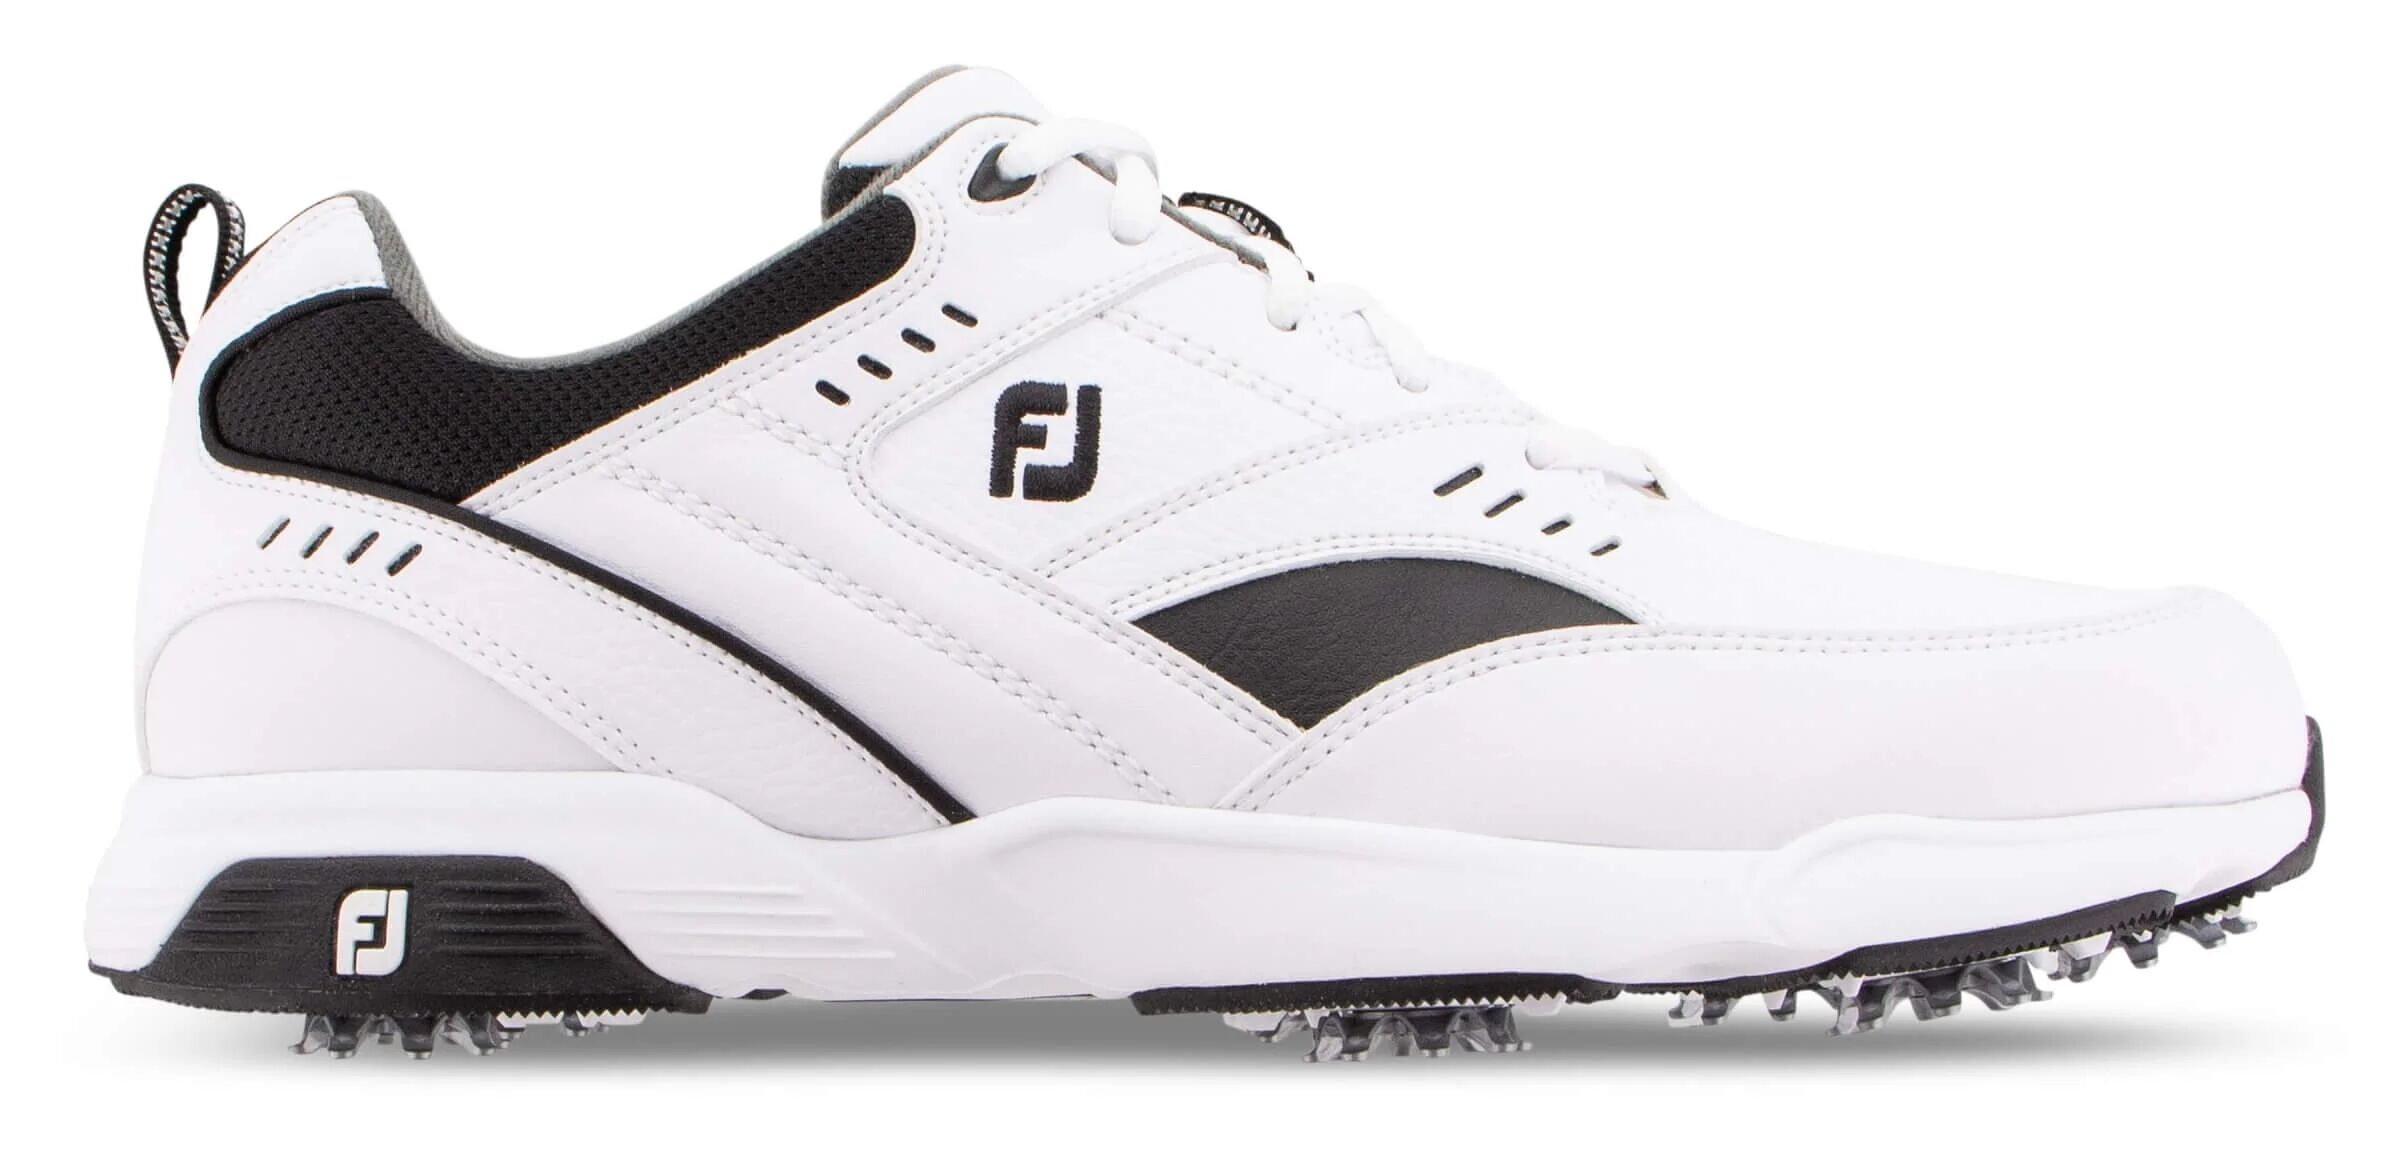 FootJoy Athletic Specialty Golf Shoes White -  - 13 - W